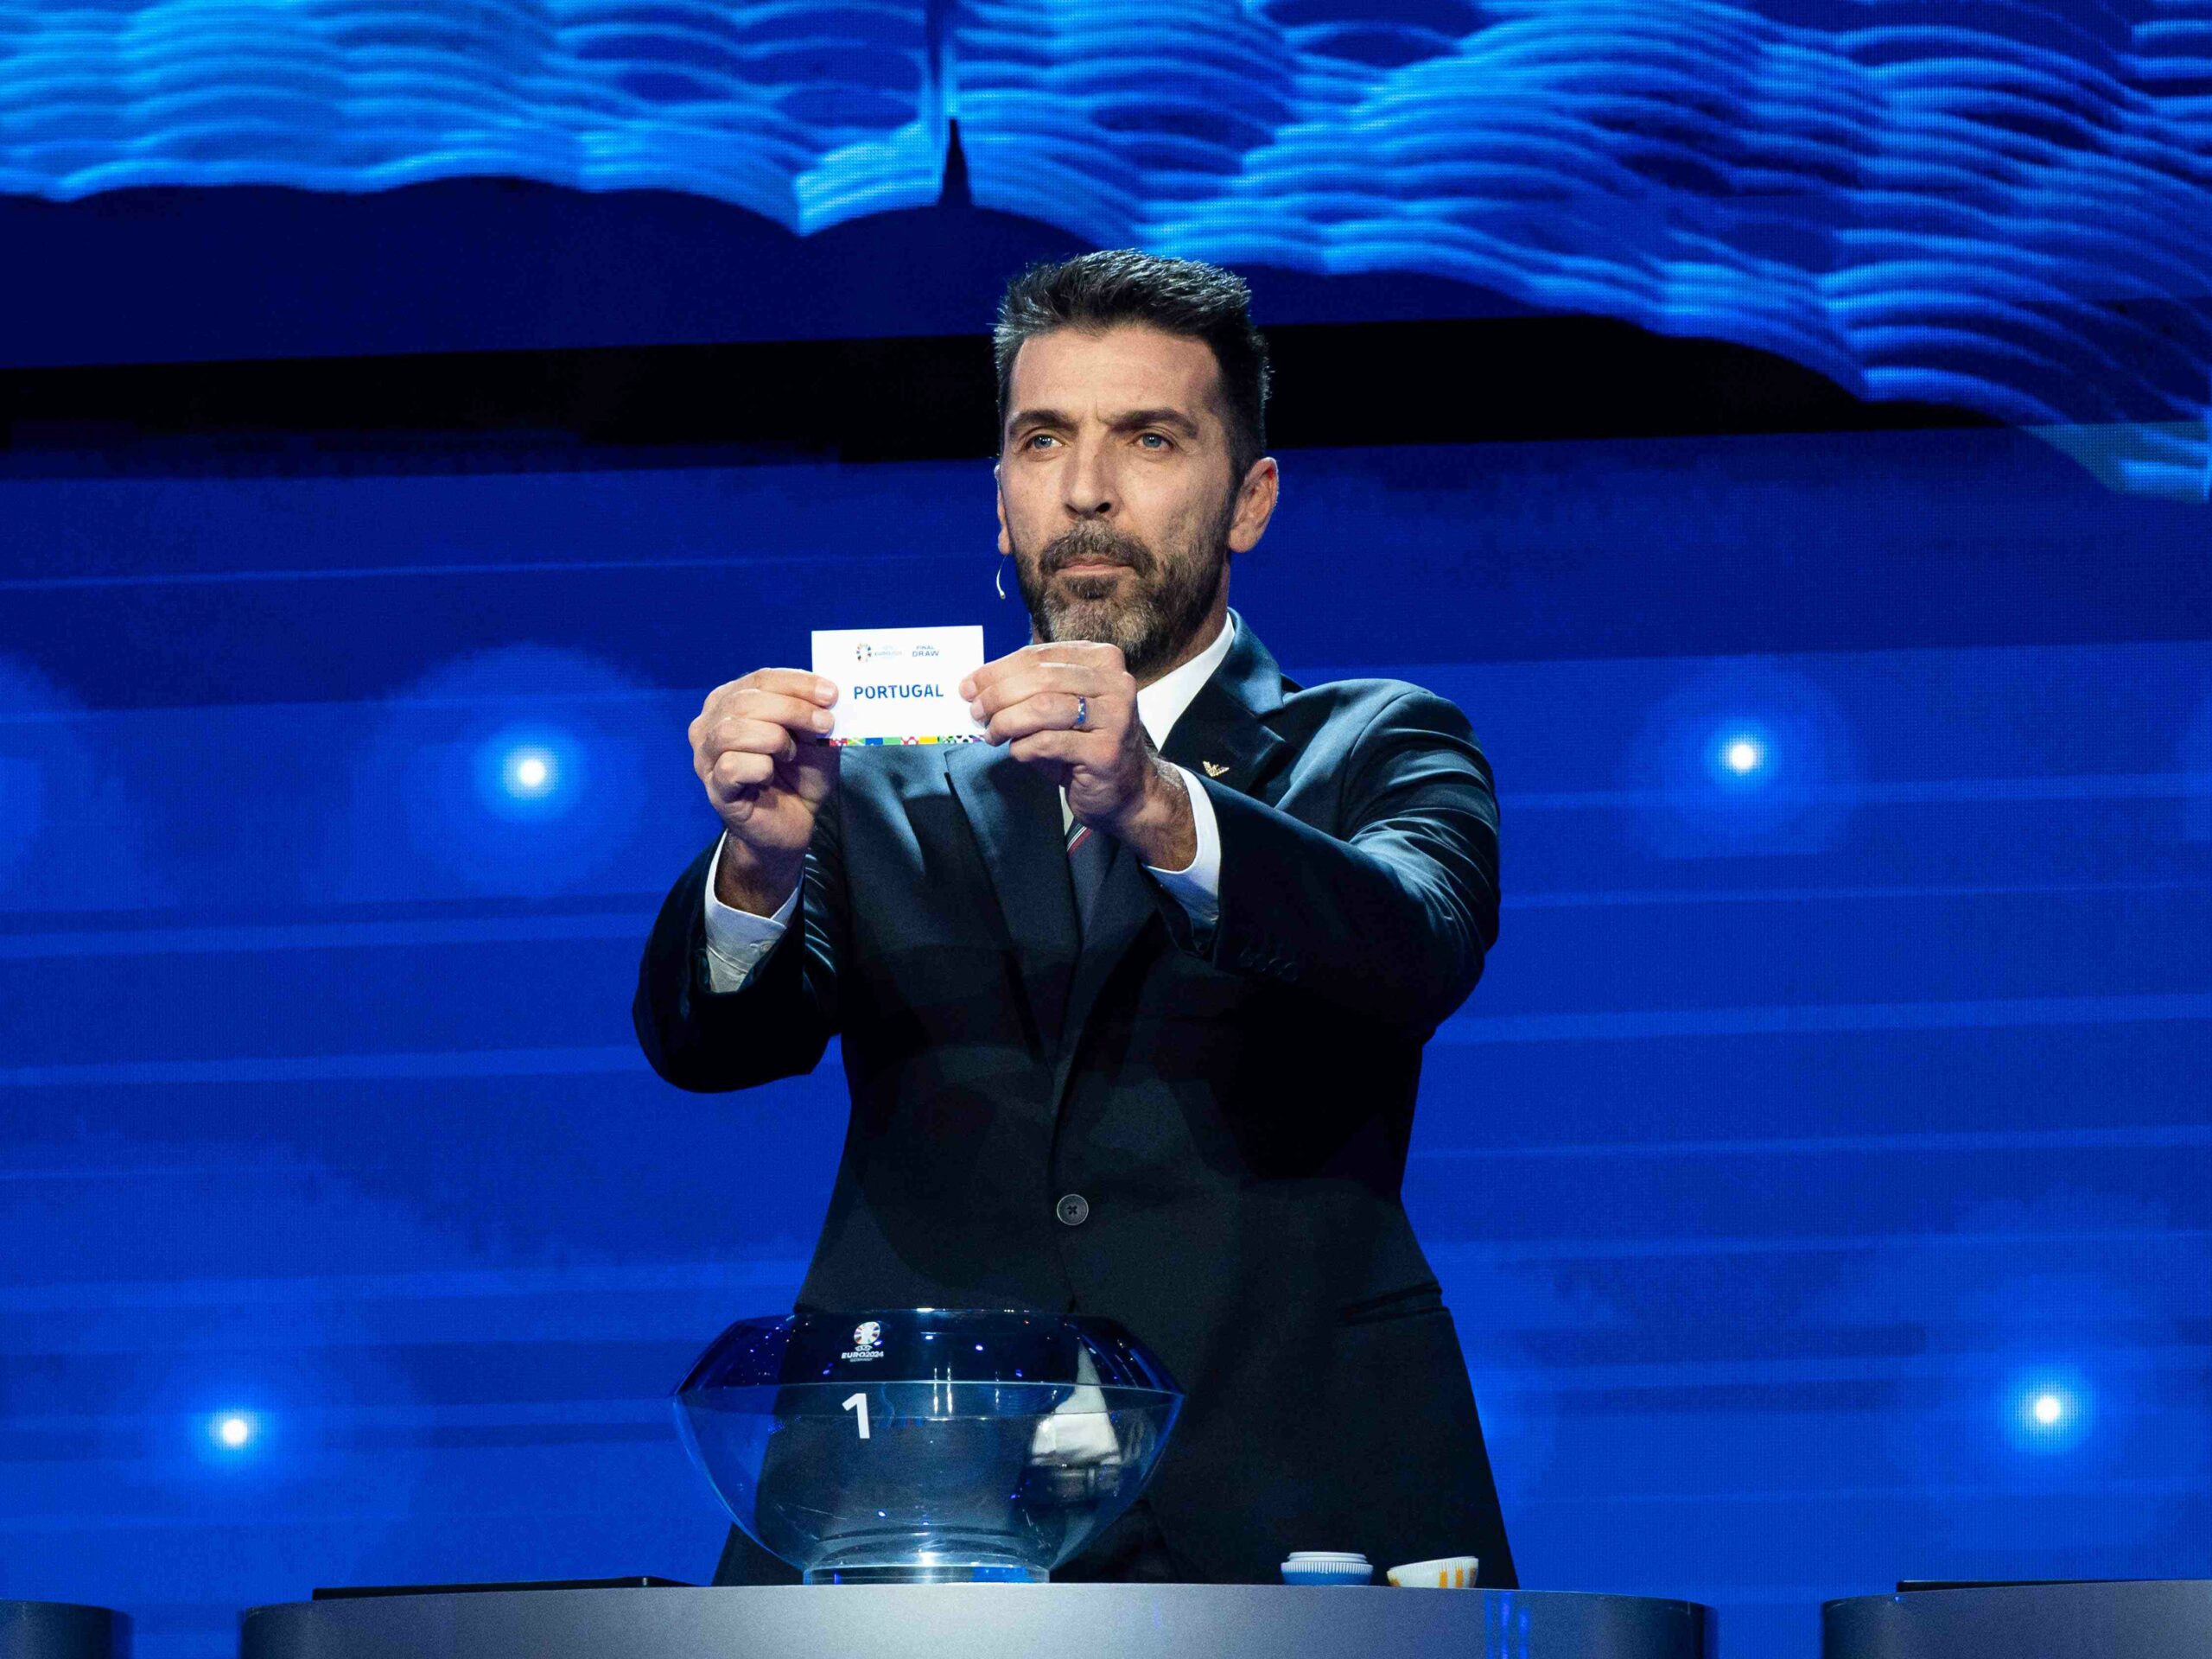 Gigi Buffon displaying the note for Portugal's qualification to Euro 2024 group stage, without celebration